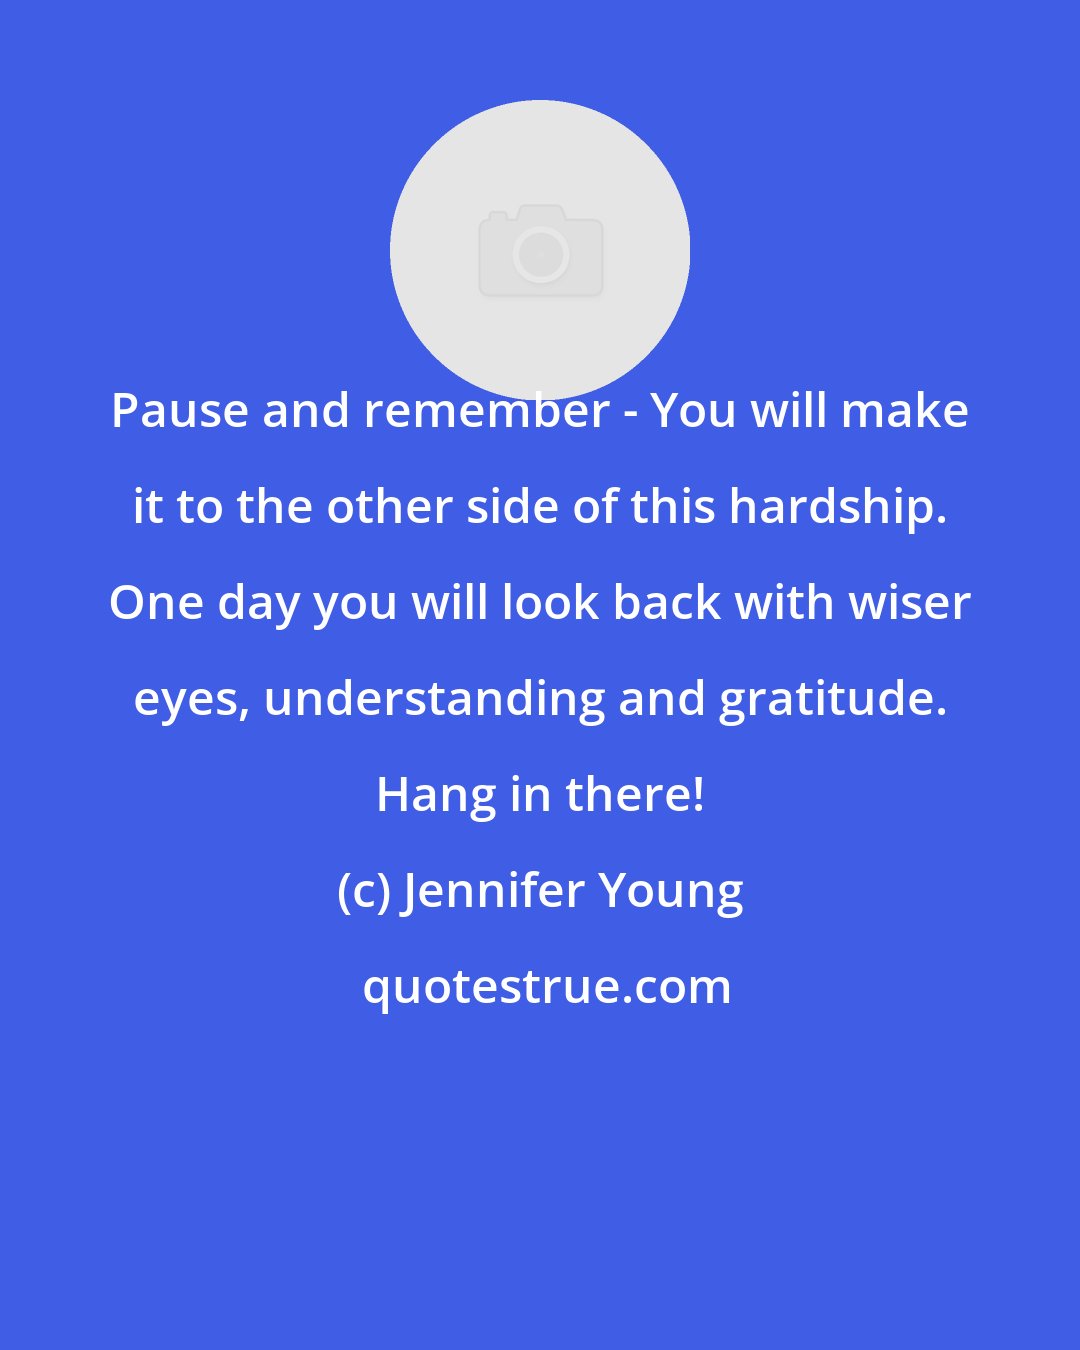 Jennifer Young: Pause and remember - You will make it to the other side of this hardship. One day you will look back with wiser eyes, understanding and gratitude. Hang in there!